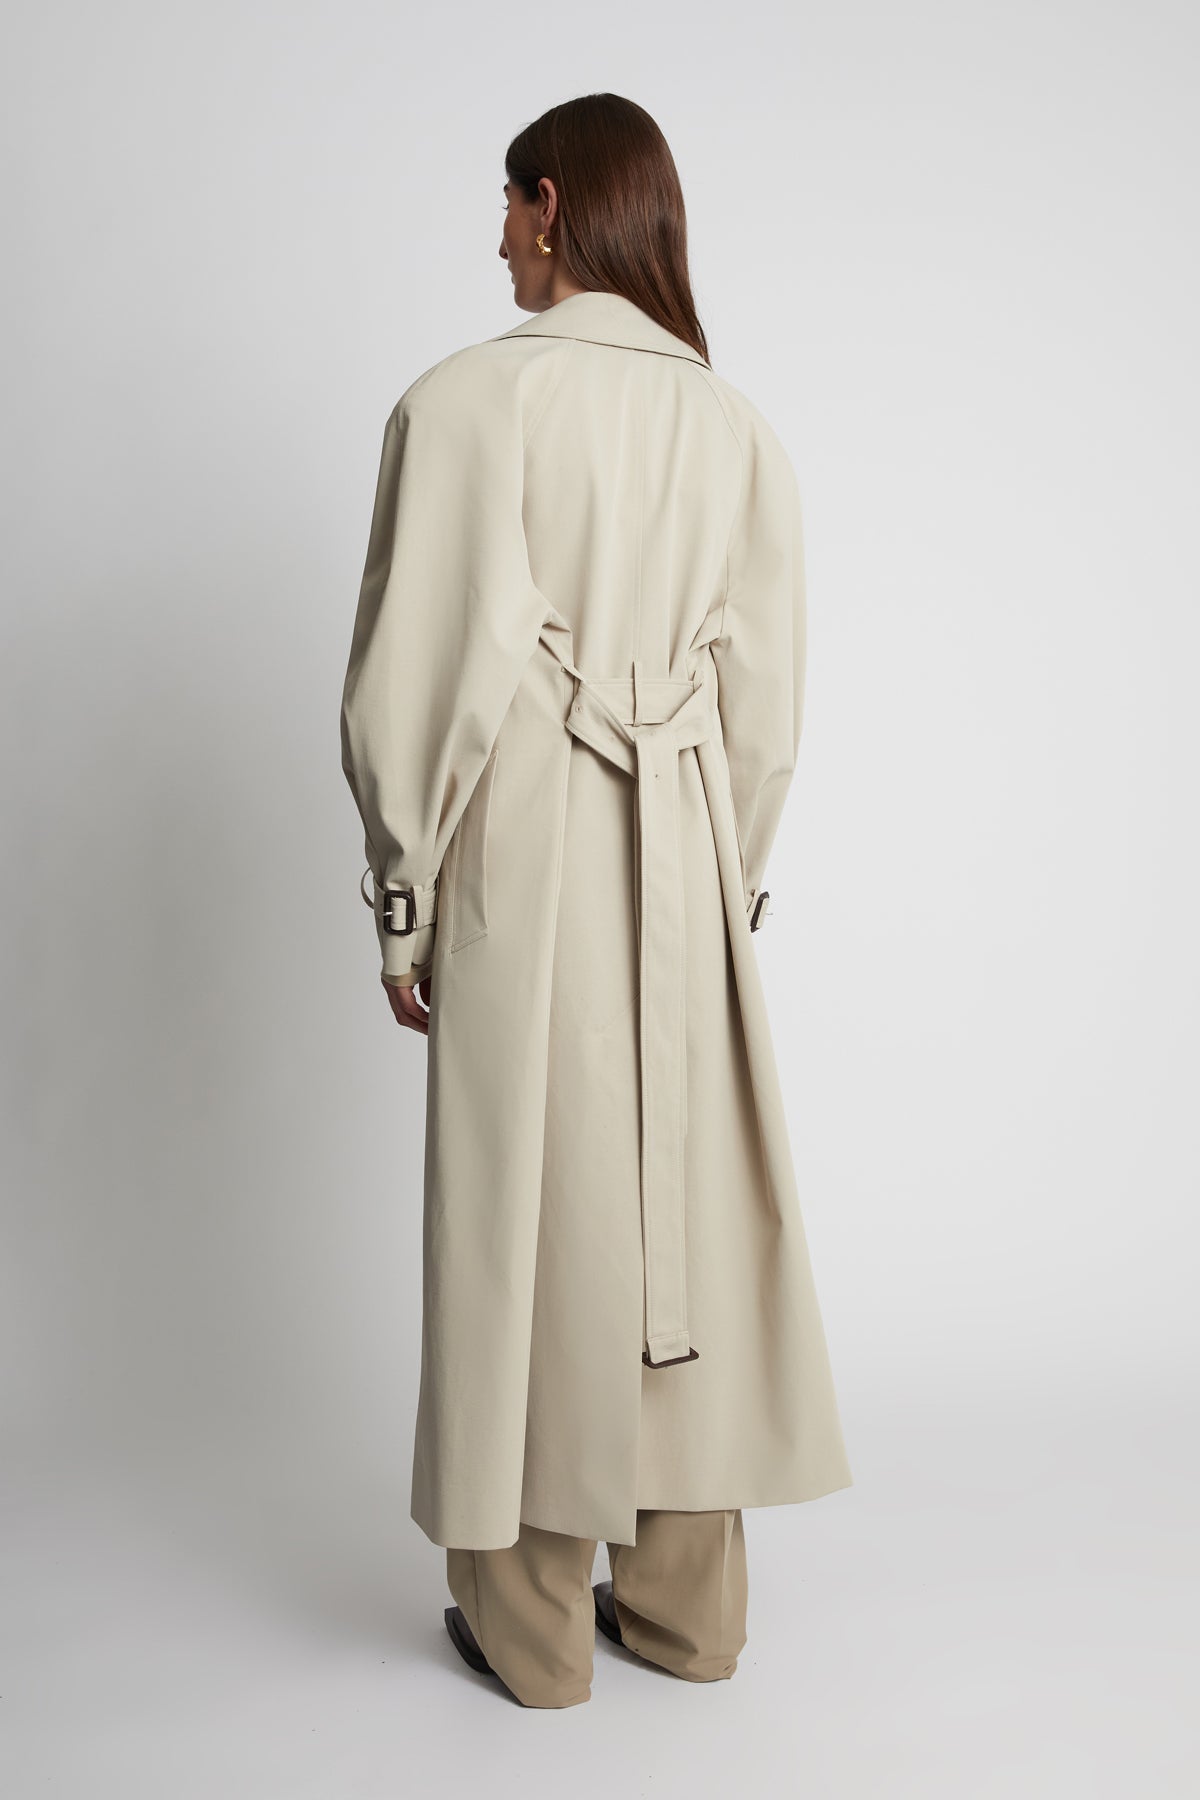 George Trench Coat in Oyster – The 5th Dimension Boutique